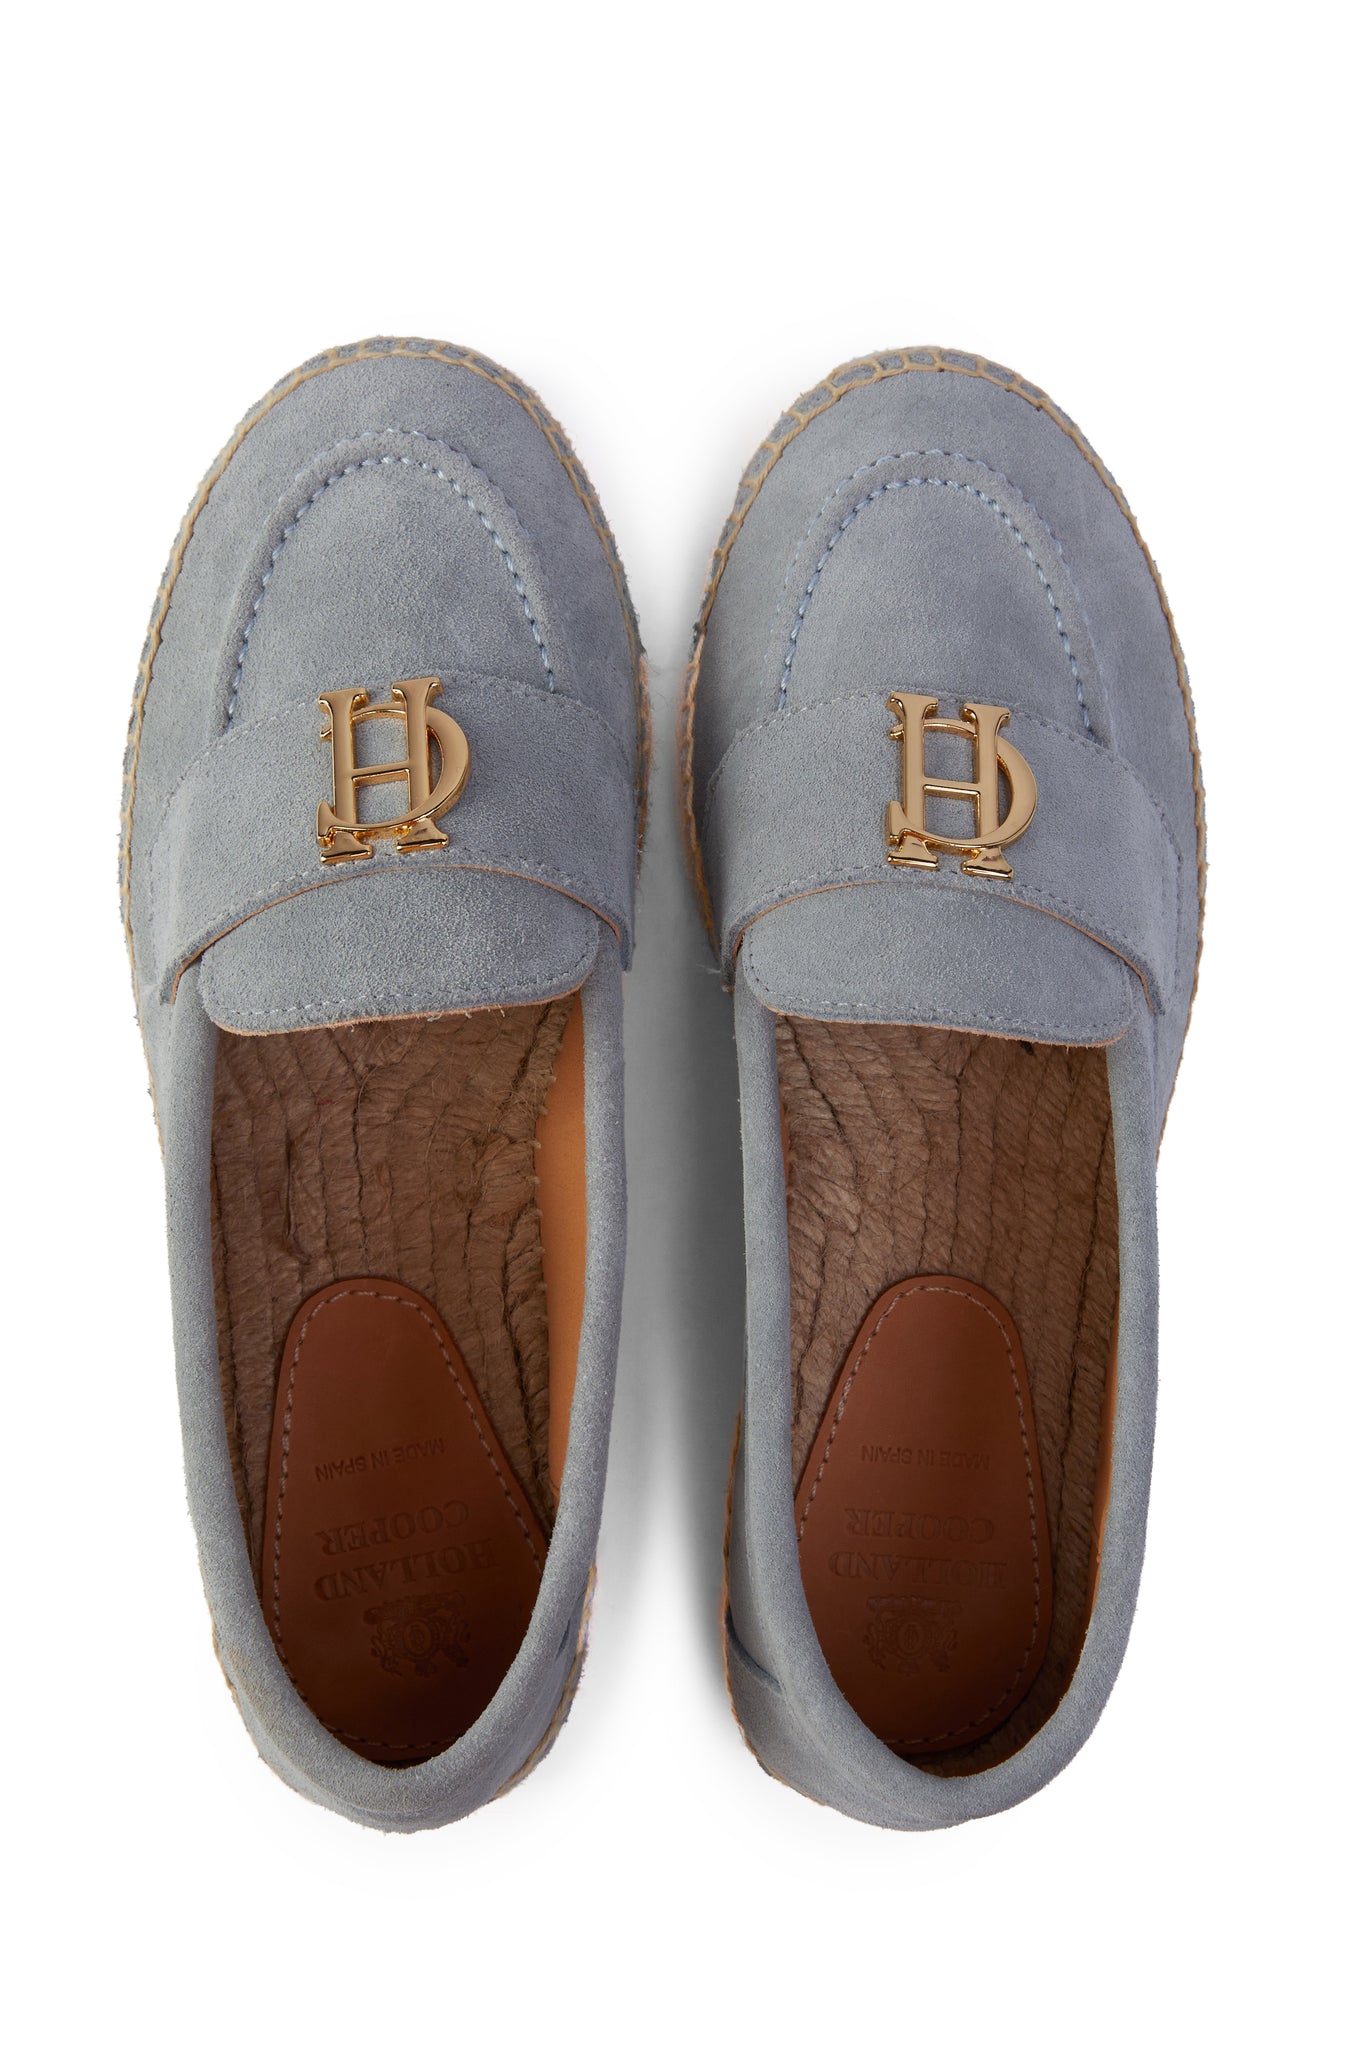 Birds eye view of light blue suede classic espadrille with plaited jute sole and gold hardware on top